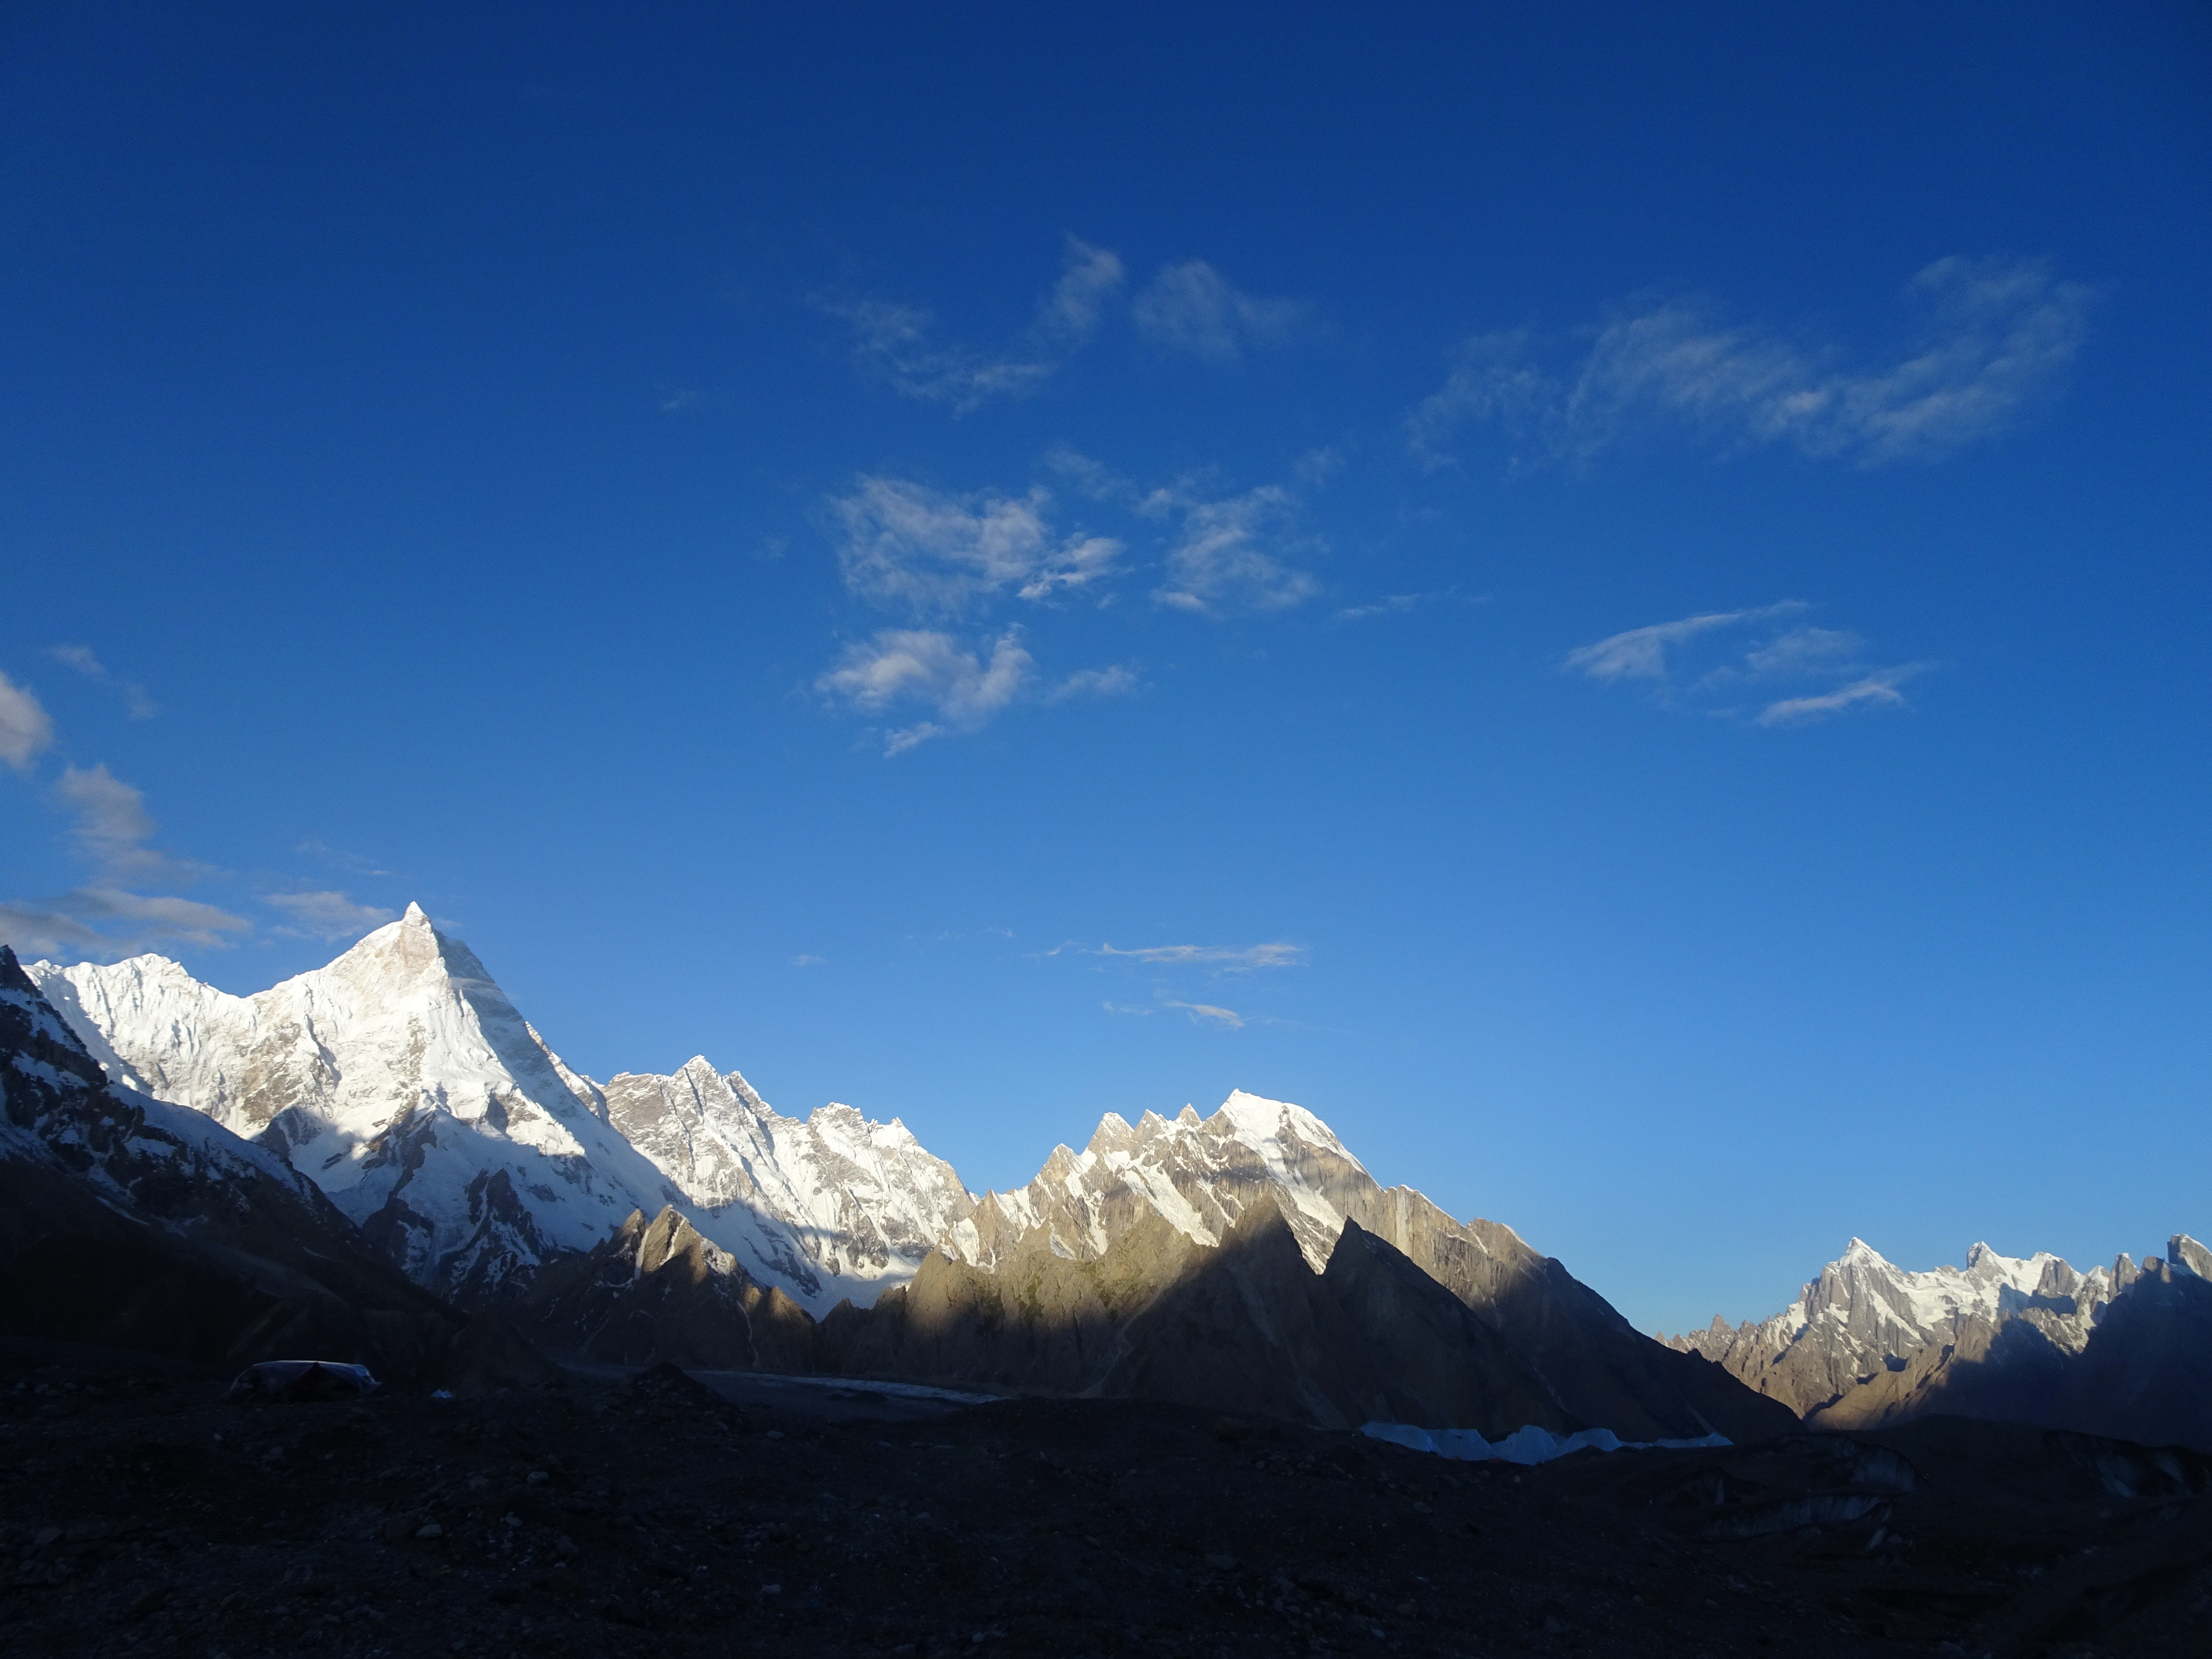 morning view of Masherbrum from Goro 2 campsite